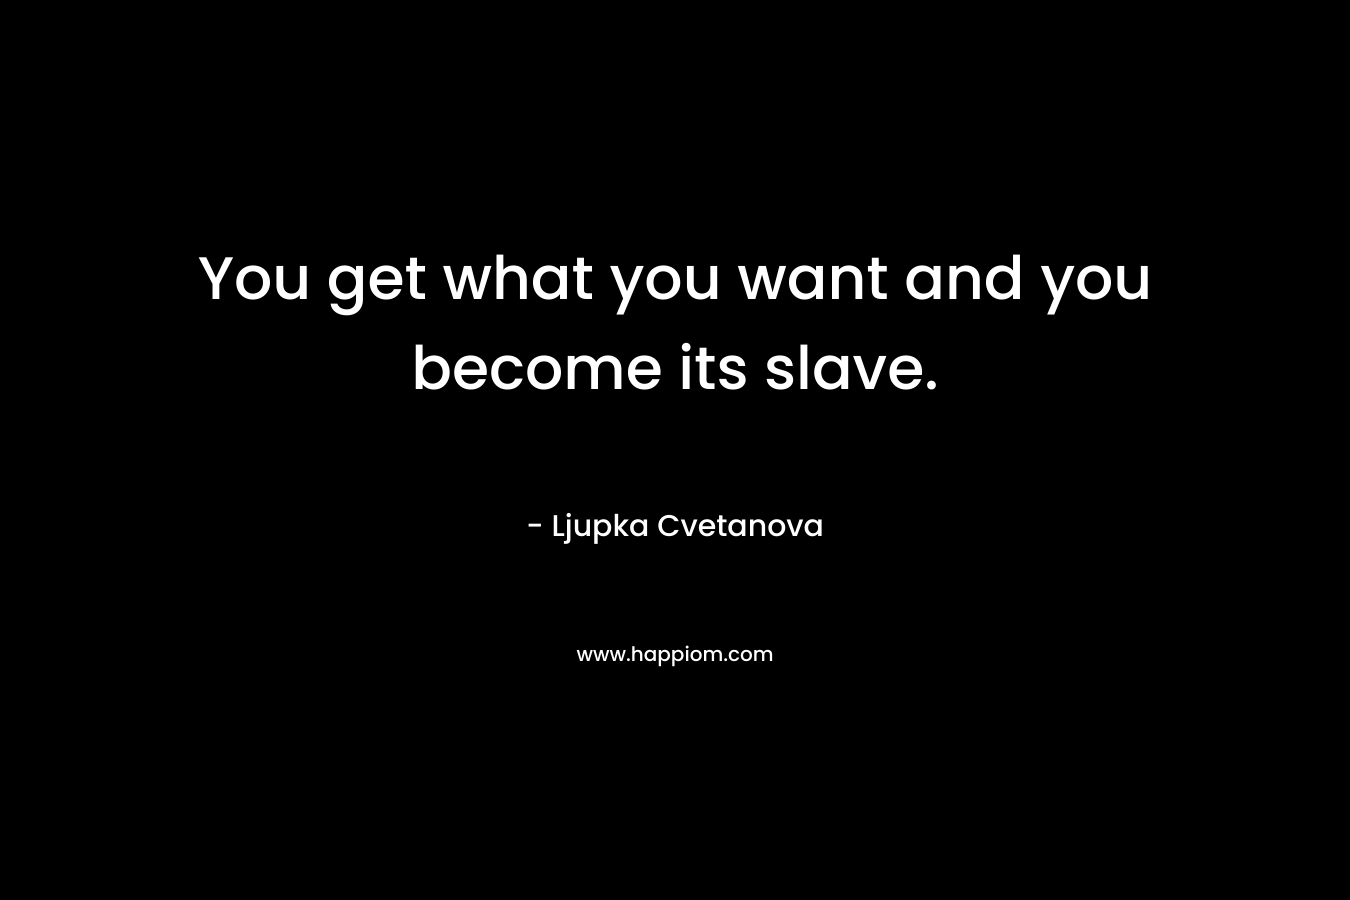 You get what you want and you become its slave.